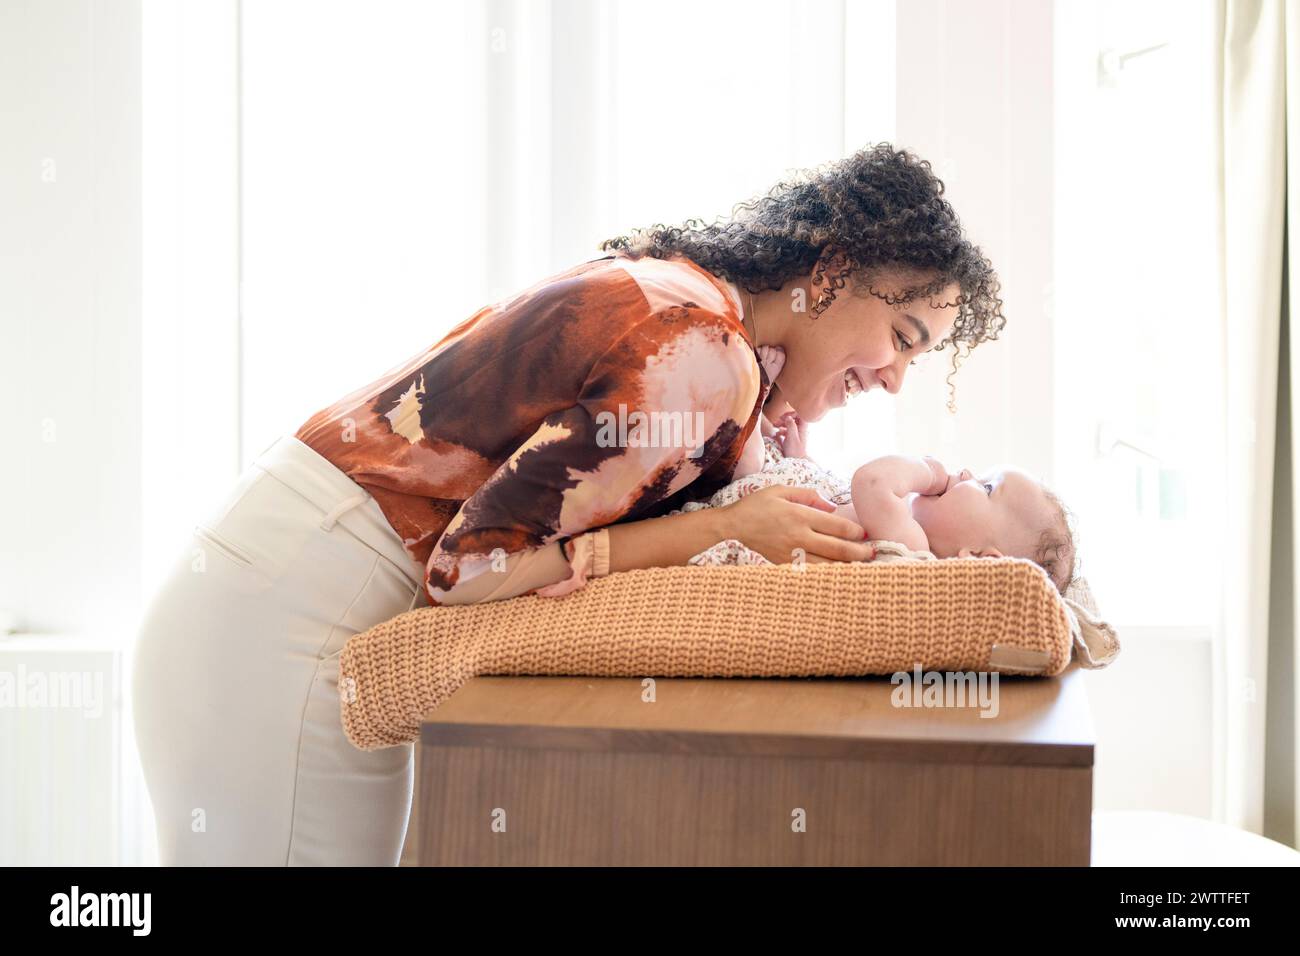 A tender moment between a mother and her baby bathed in soft, natural light. Stock Photo